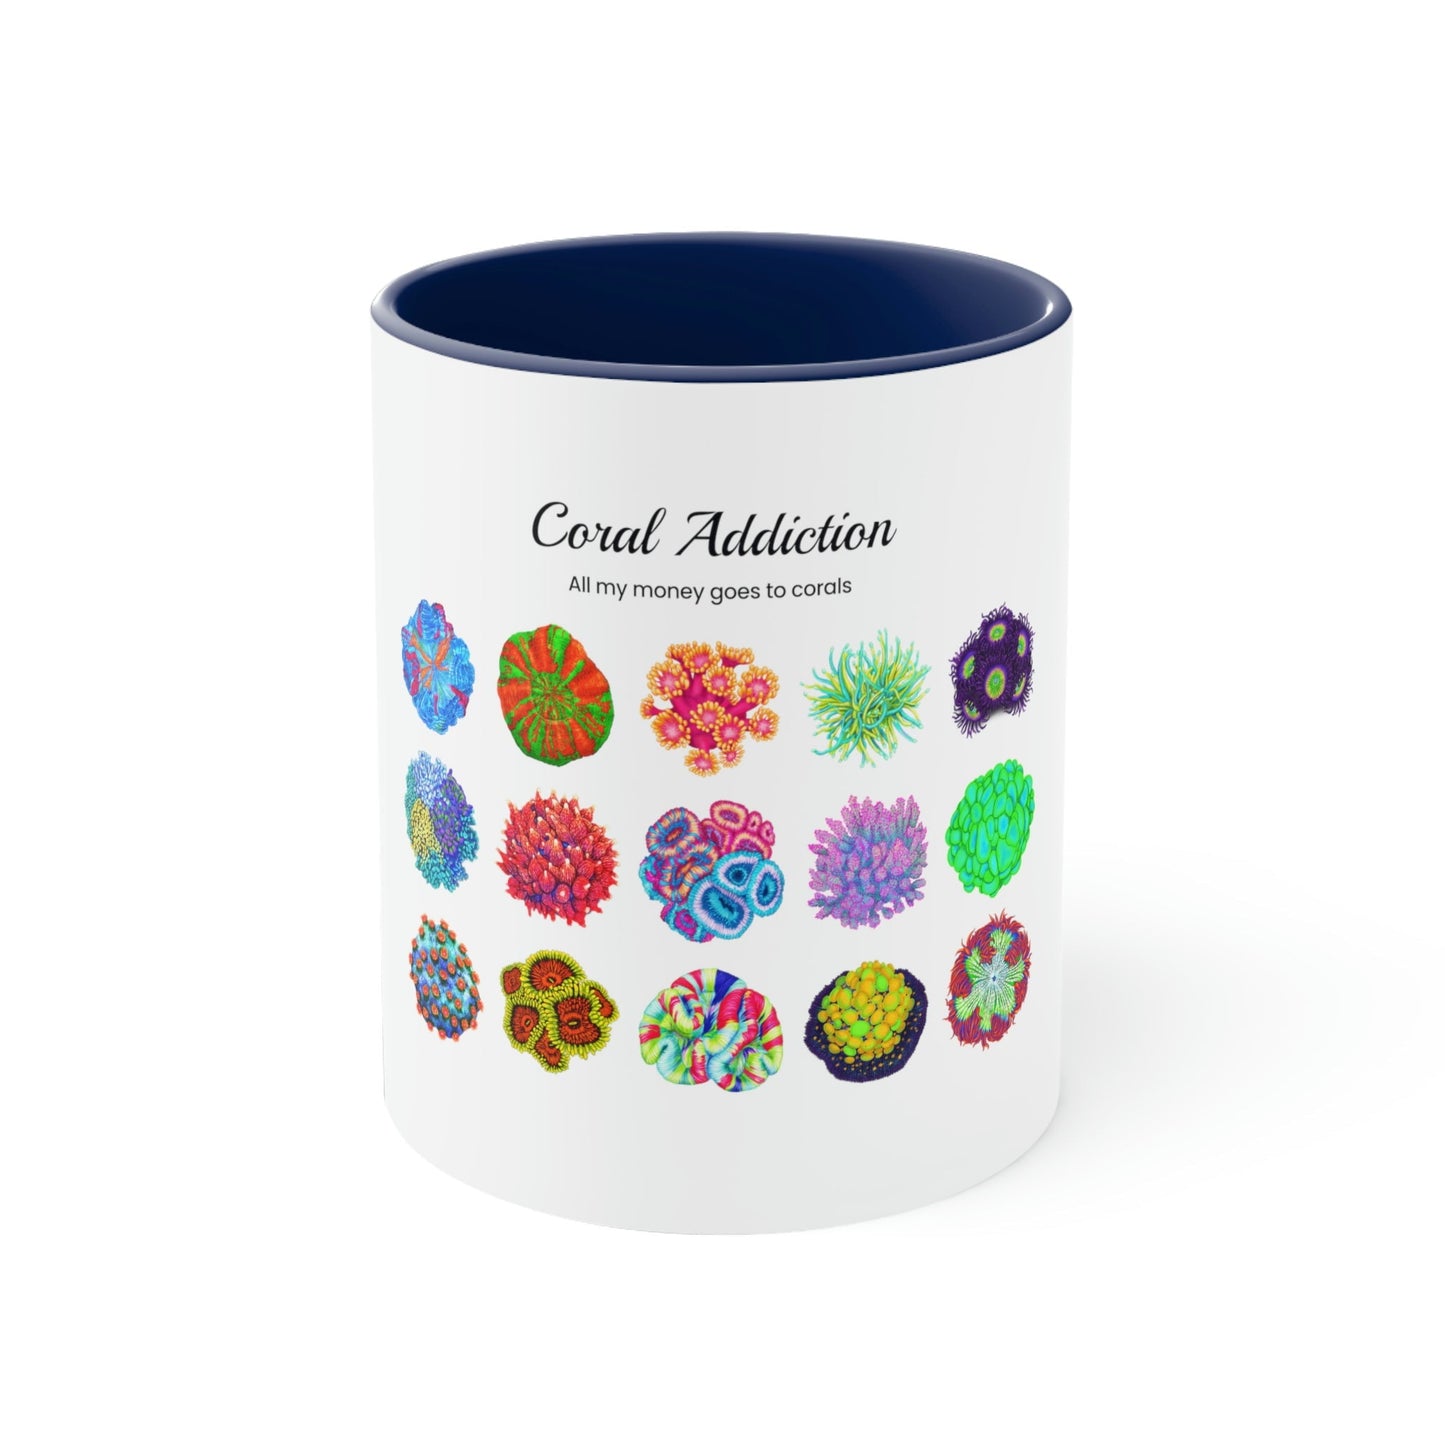 Coral Addiction (ft. 15 Hand-drawn Corals) - Reef of Clowns